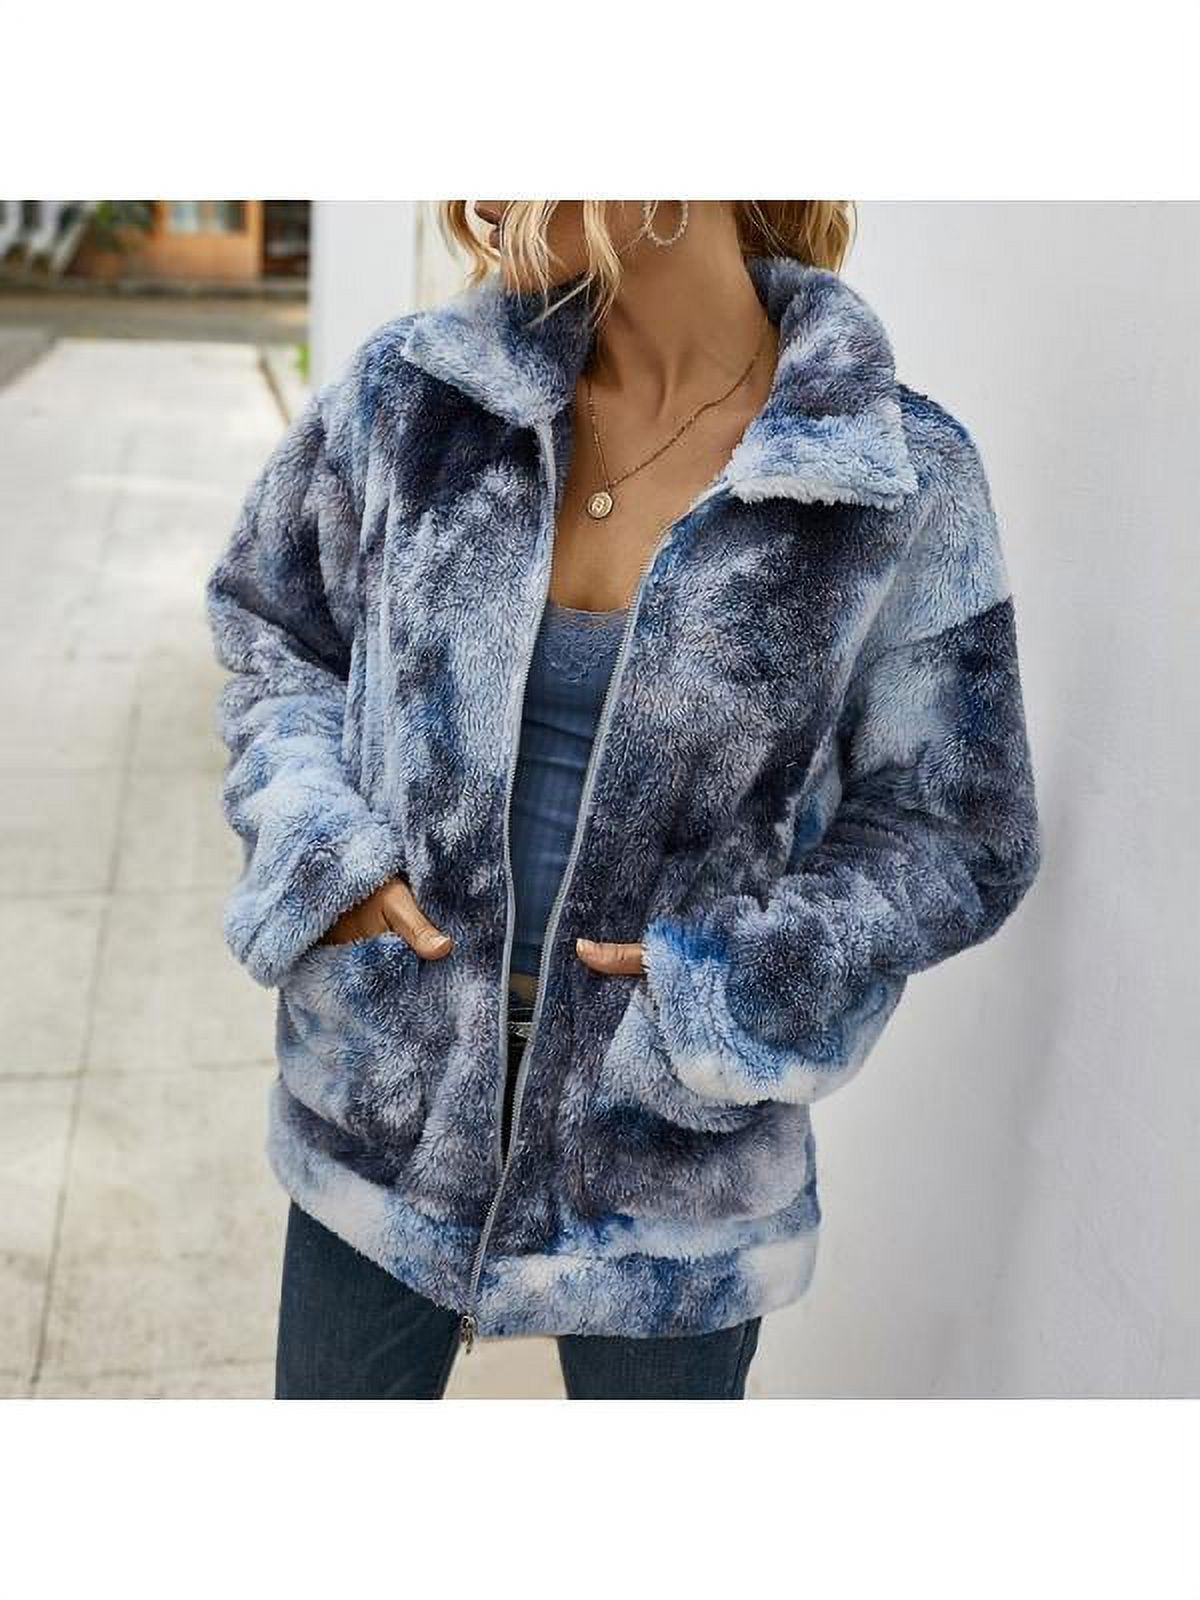 Luxsea Women Autumn Casual Ladies Fashion Tie Dye Jacket With Pocket Daily Coats - image 4 of 7